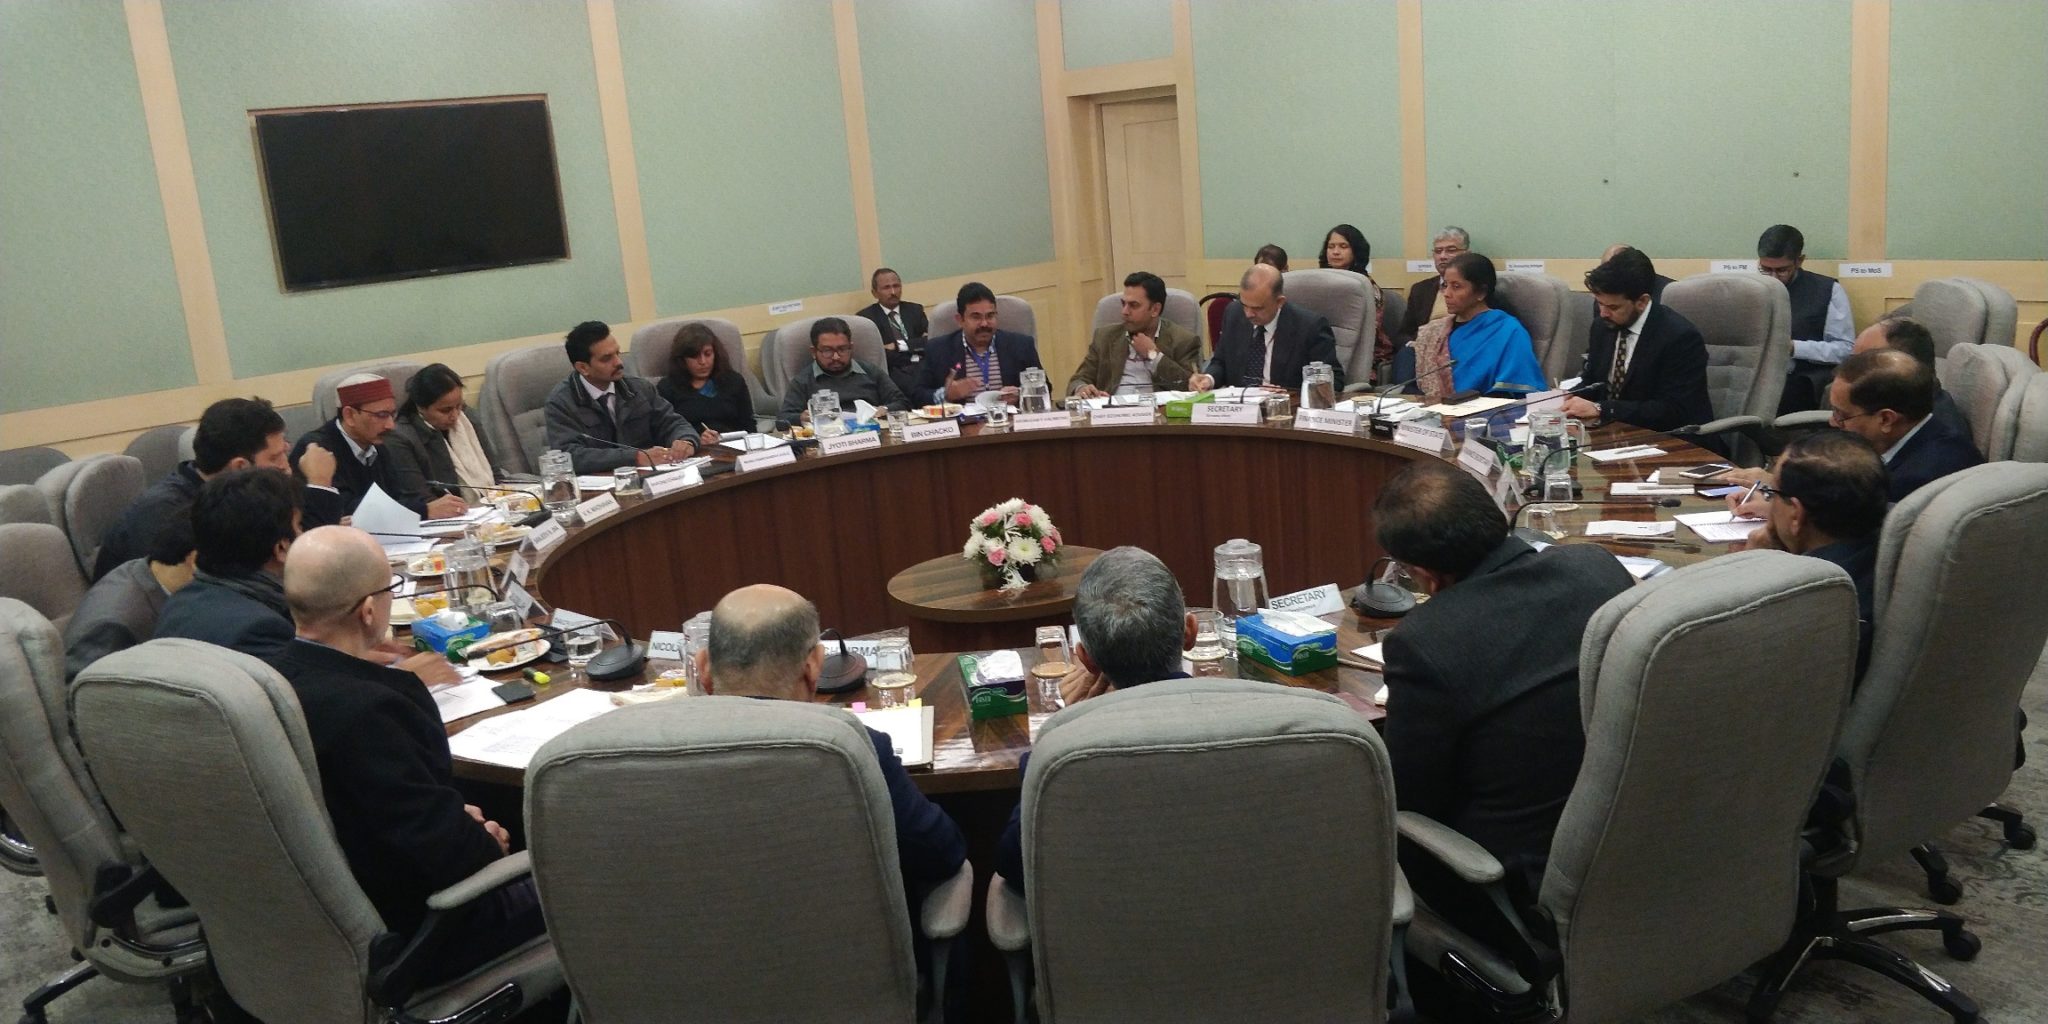 FM holds Pre-Budget Consultation with representatives from Water and Sanitation sectors decoding=